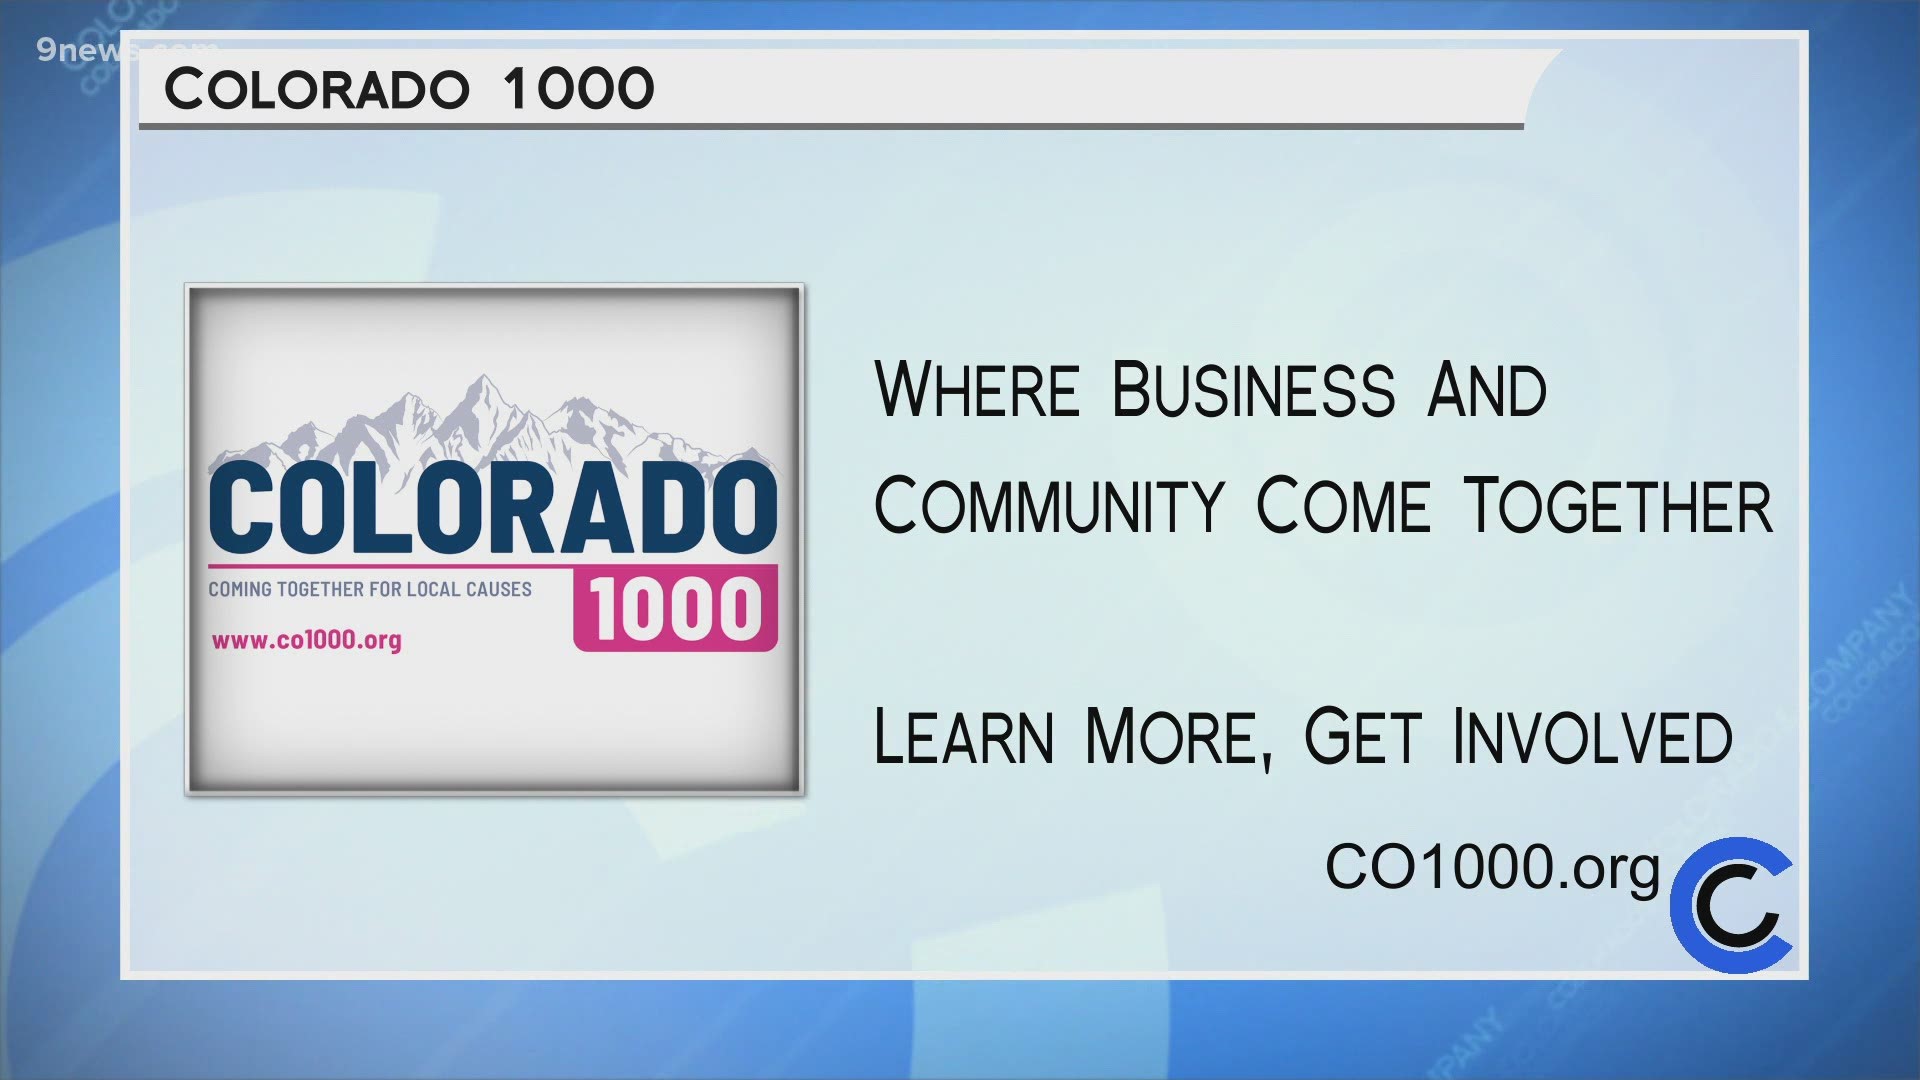 Learn more about the businesses in your area committed to giving back at CO1000.org.